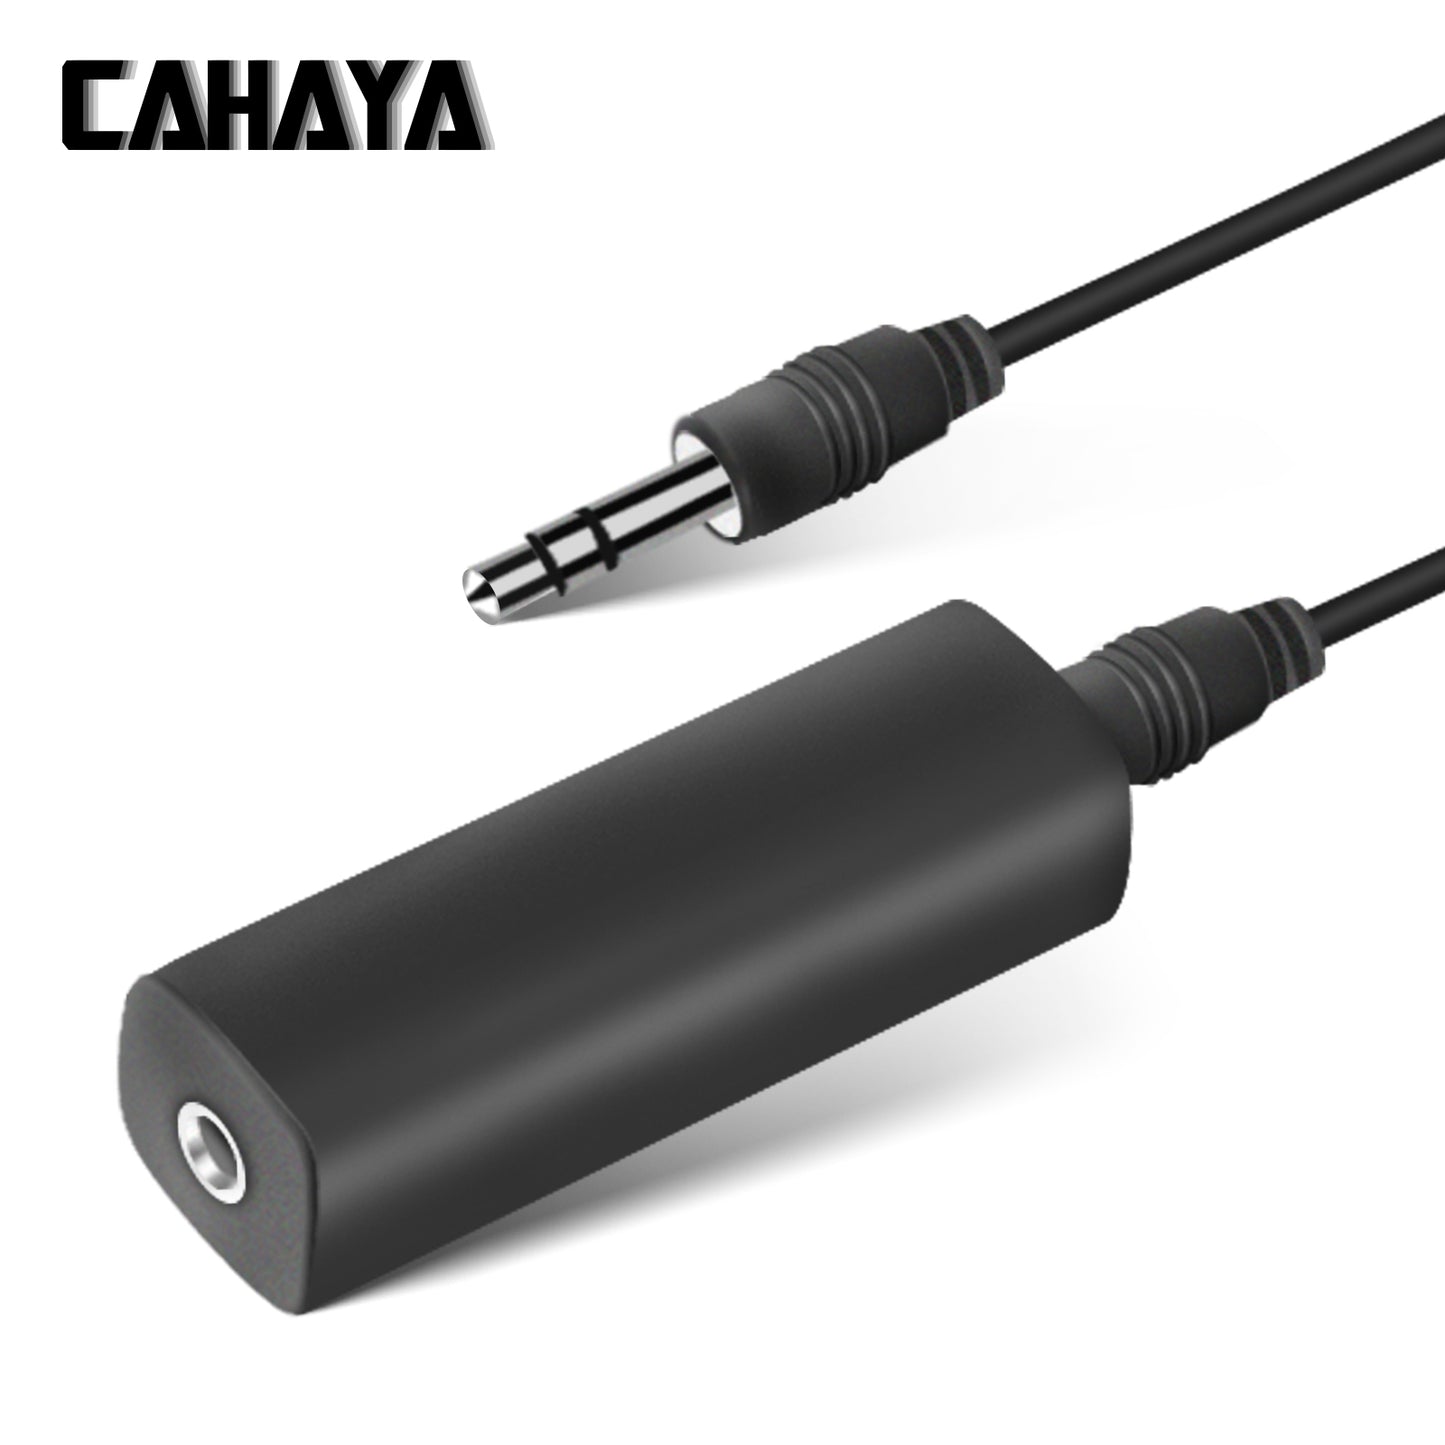 CAHAYA Ground Loop Noise Isolator Acoustic Coupling Devices